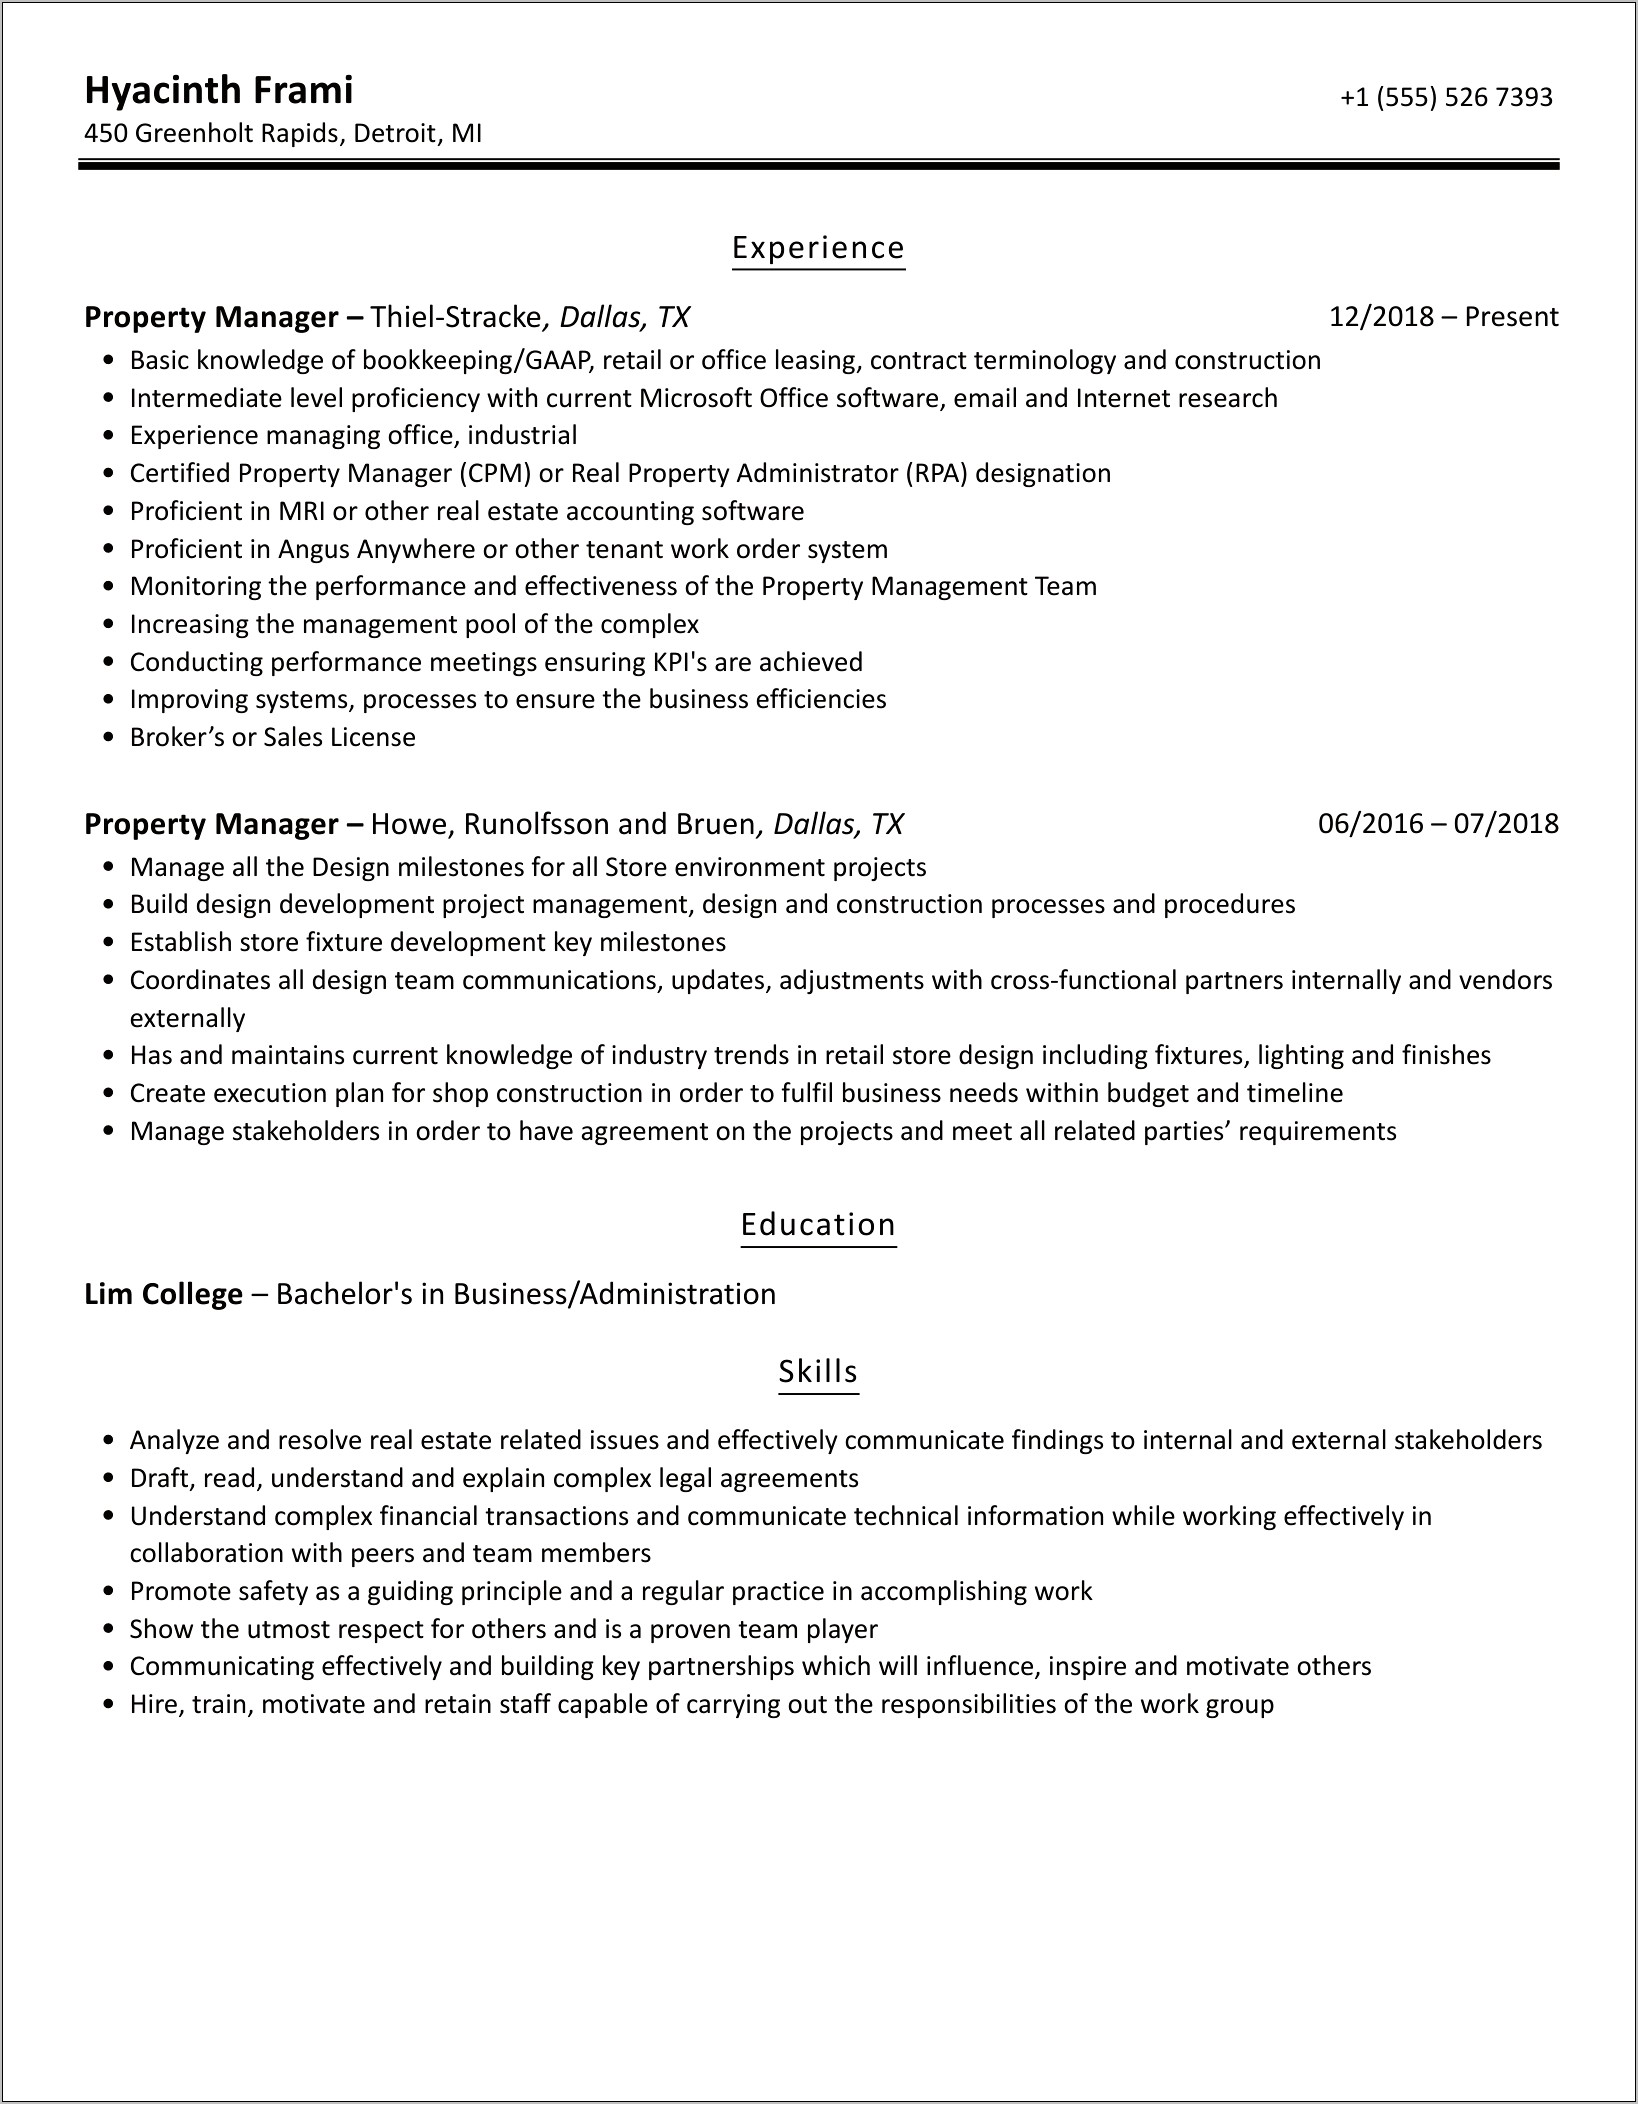 Tax Credit Property Manager Resume